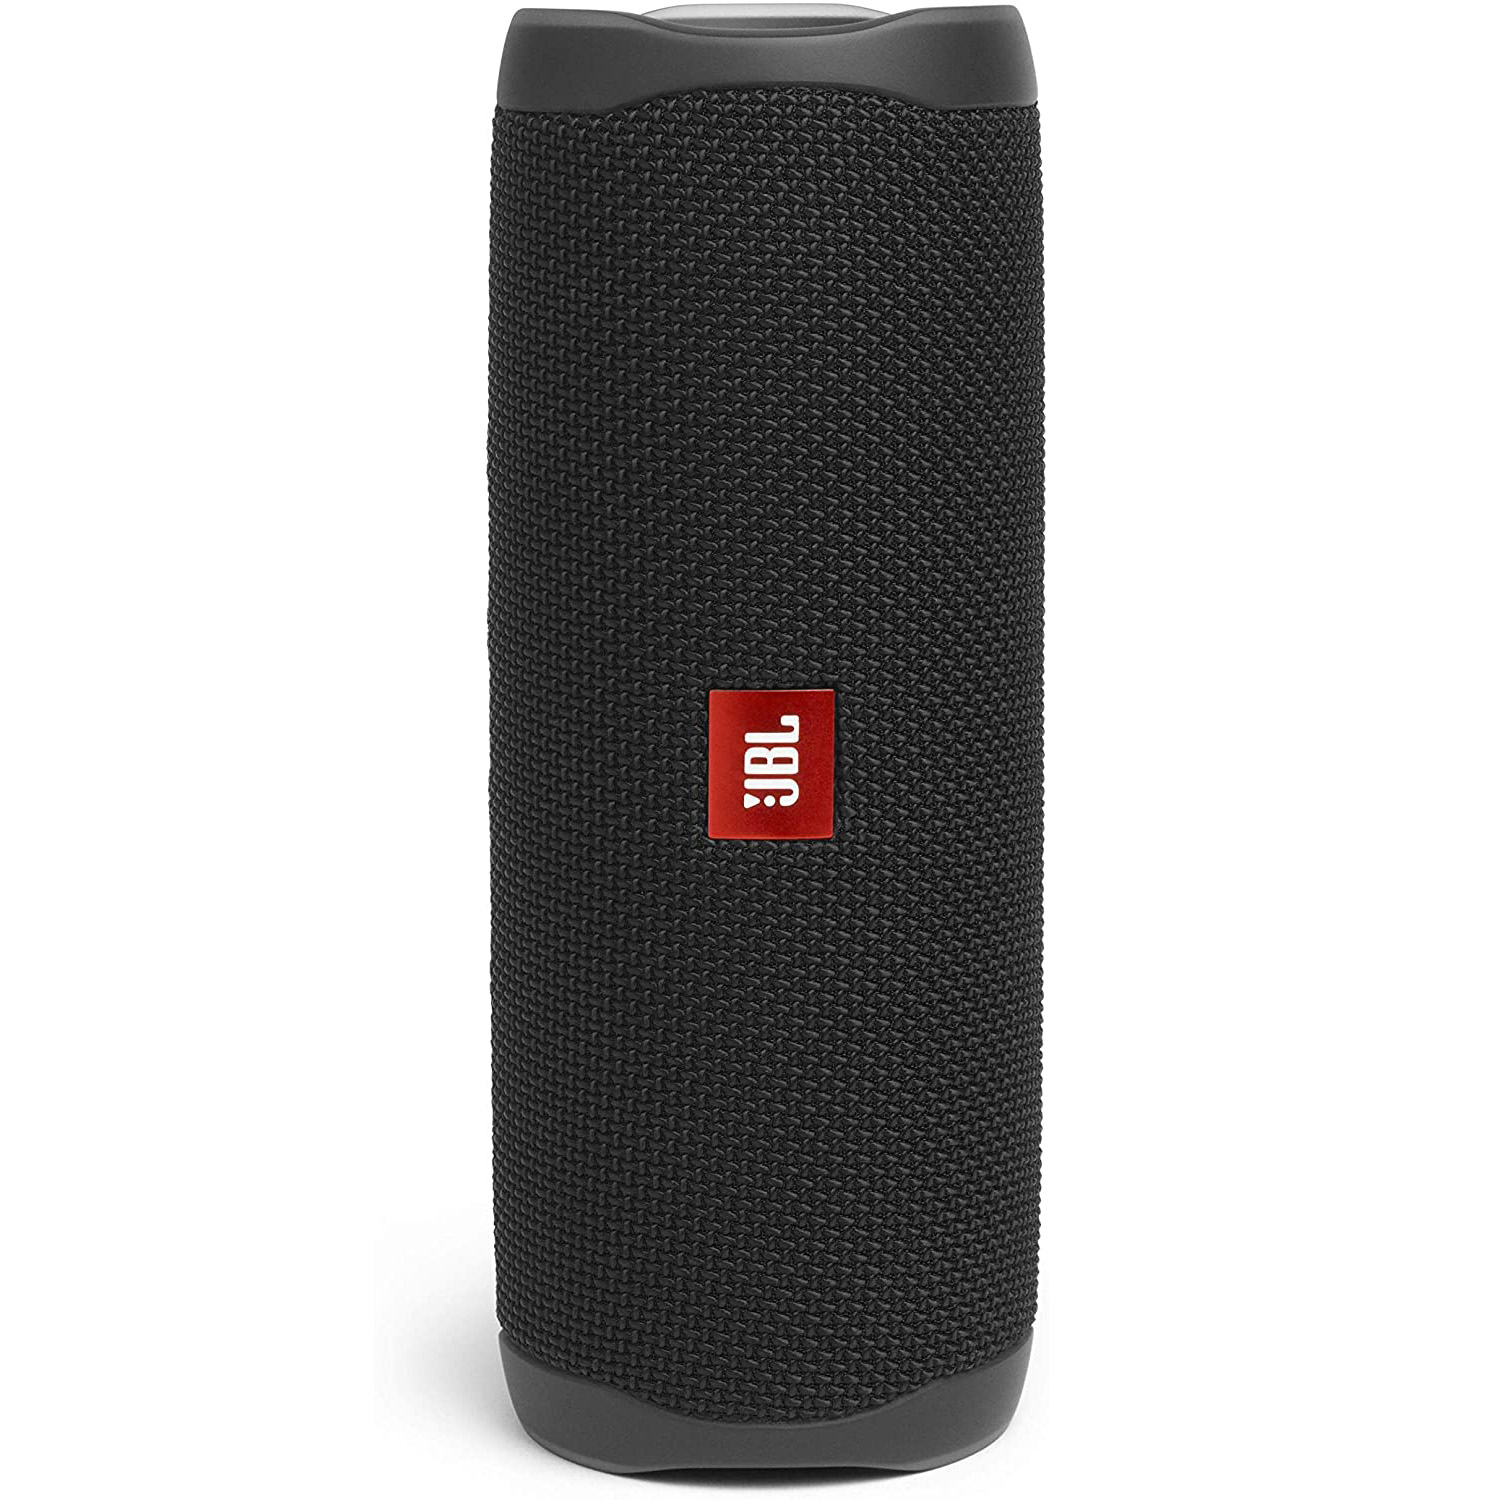 The Best Bluetooth Speakers for Home, Gym and Outdoor Enthusiasts Top